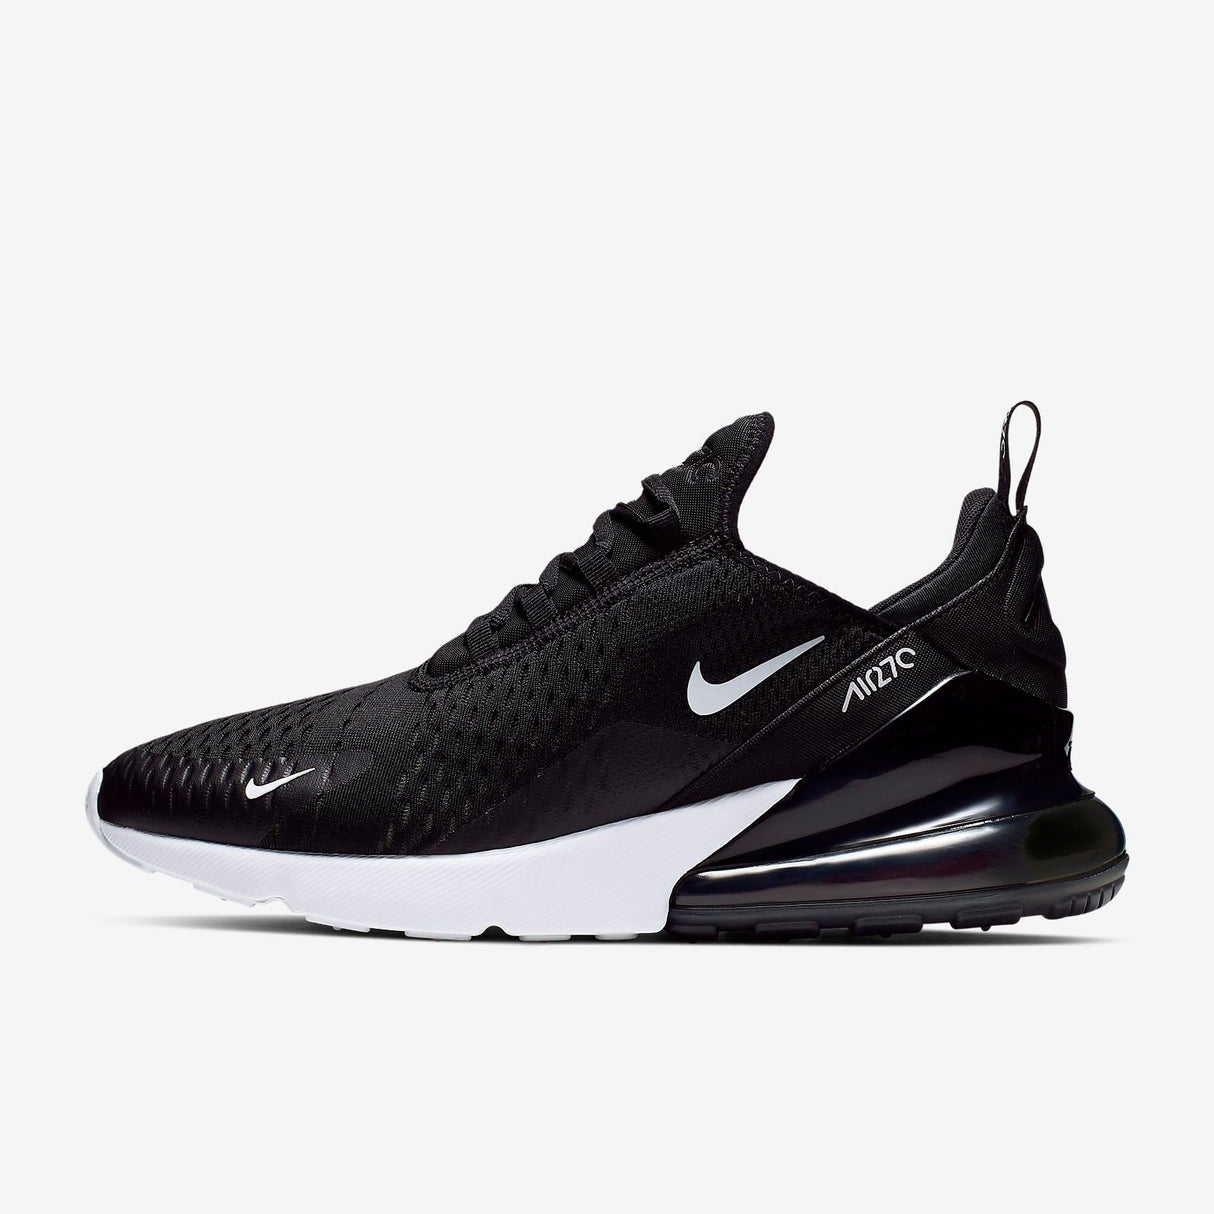 Nike Air Max 270 Trainers in Black/White/Solar Red/Anthracite